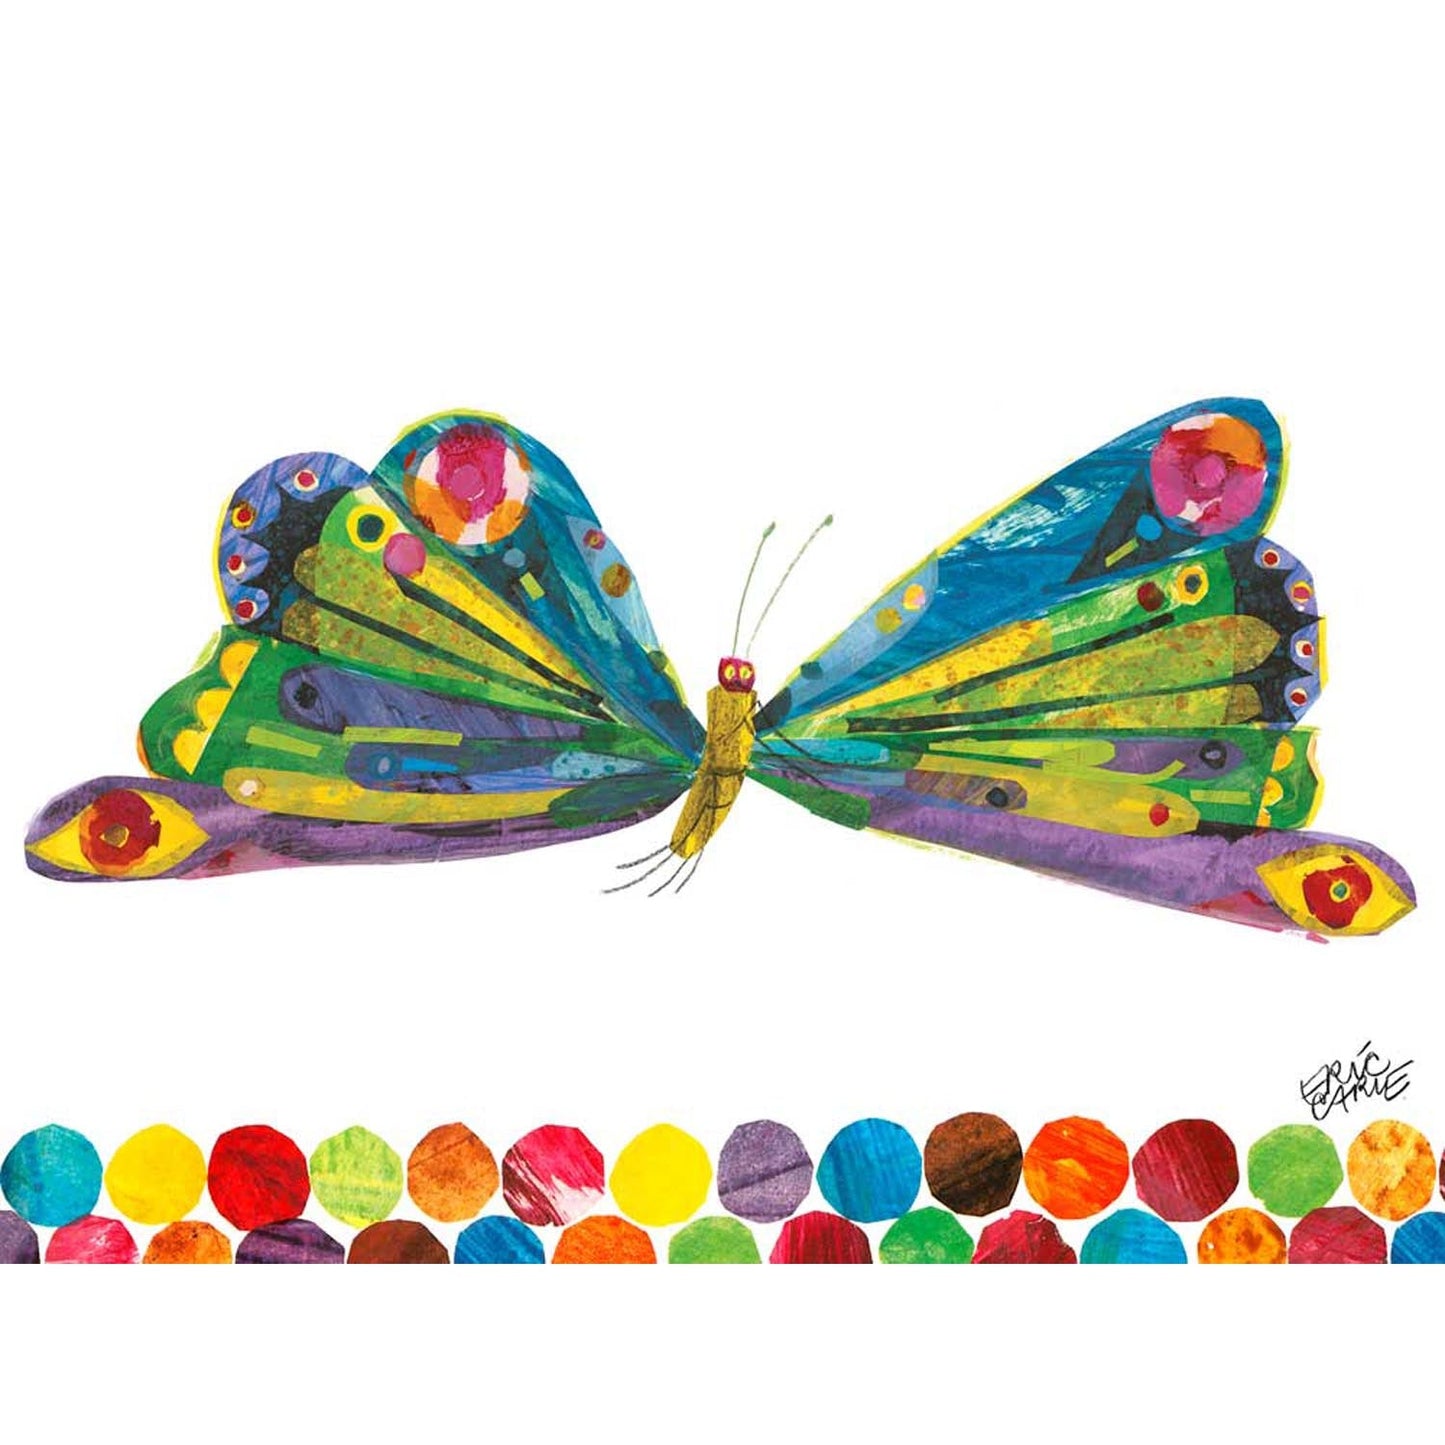 Eric Carle's Butterfly Canvas Wall Art